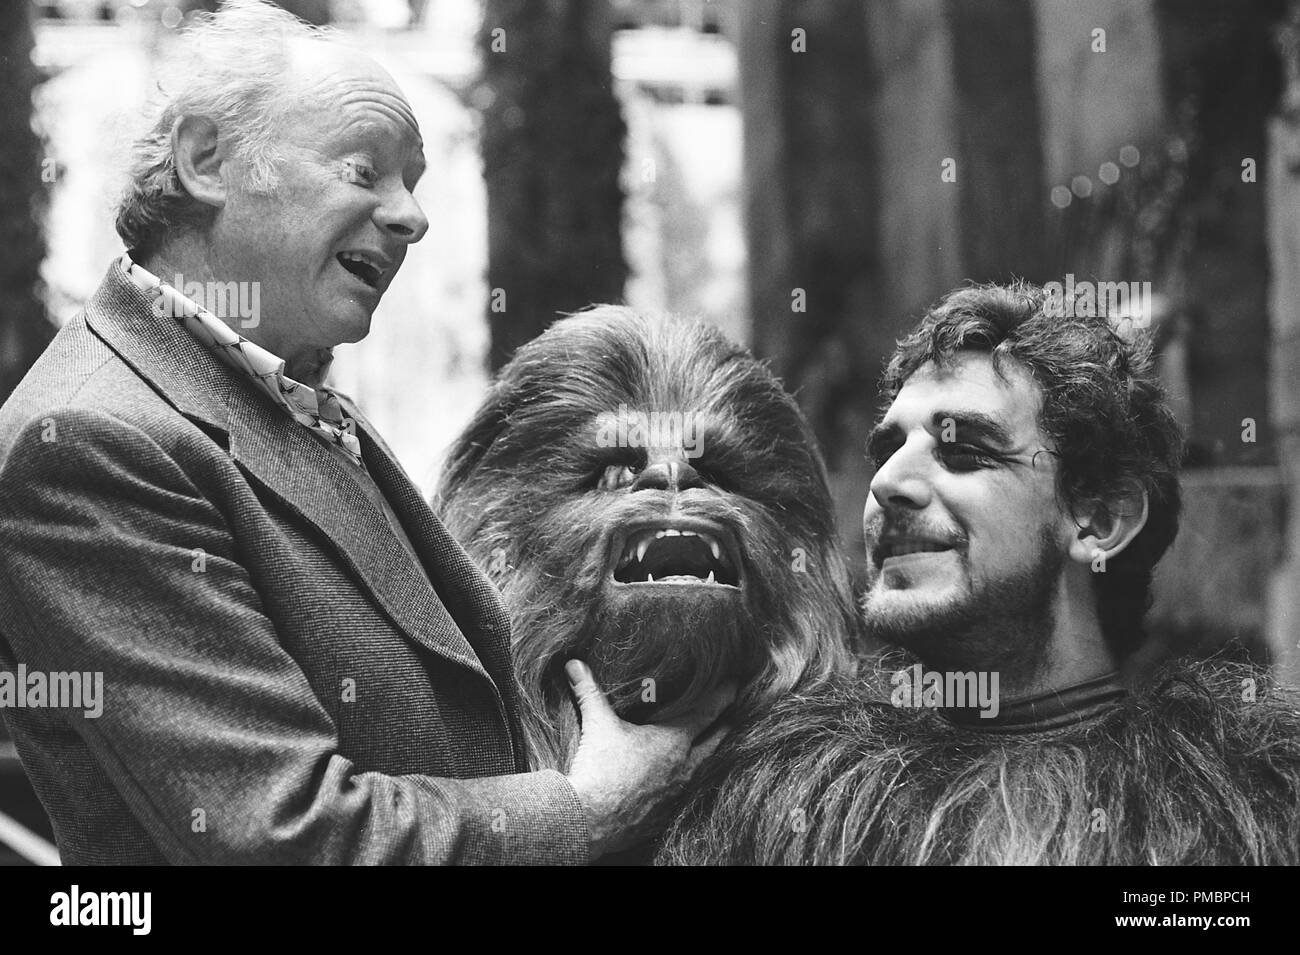 Makeup artist Stuart Freeborn and Peter Mayhew rehearse some of Chewbacca's lines in 'Star Wars Episode IV: A New Hope' (1977)  File Reference # 32603 416THA Stock Photo